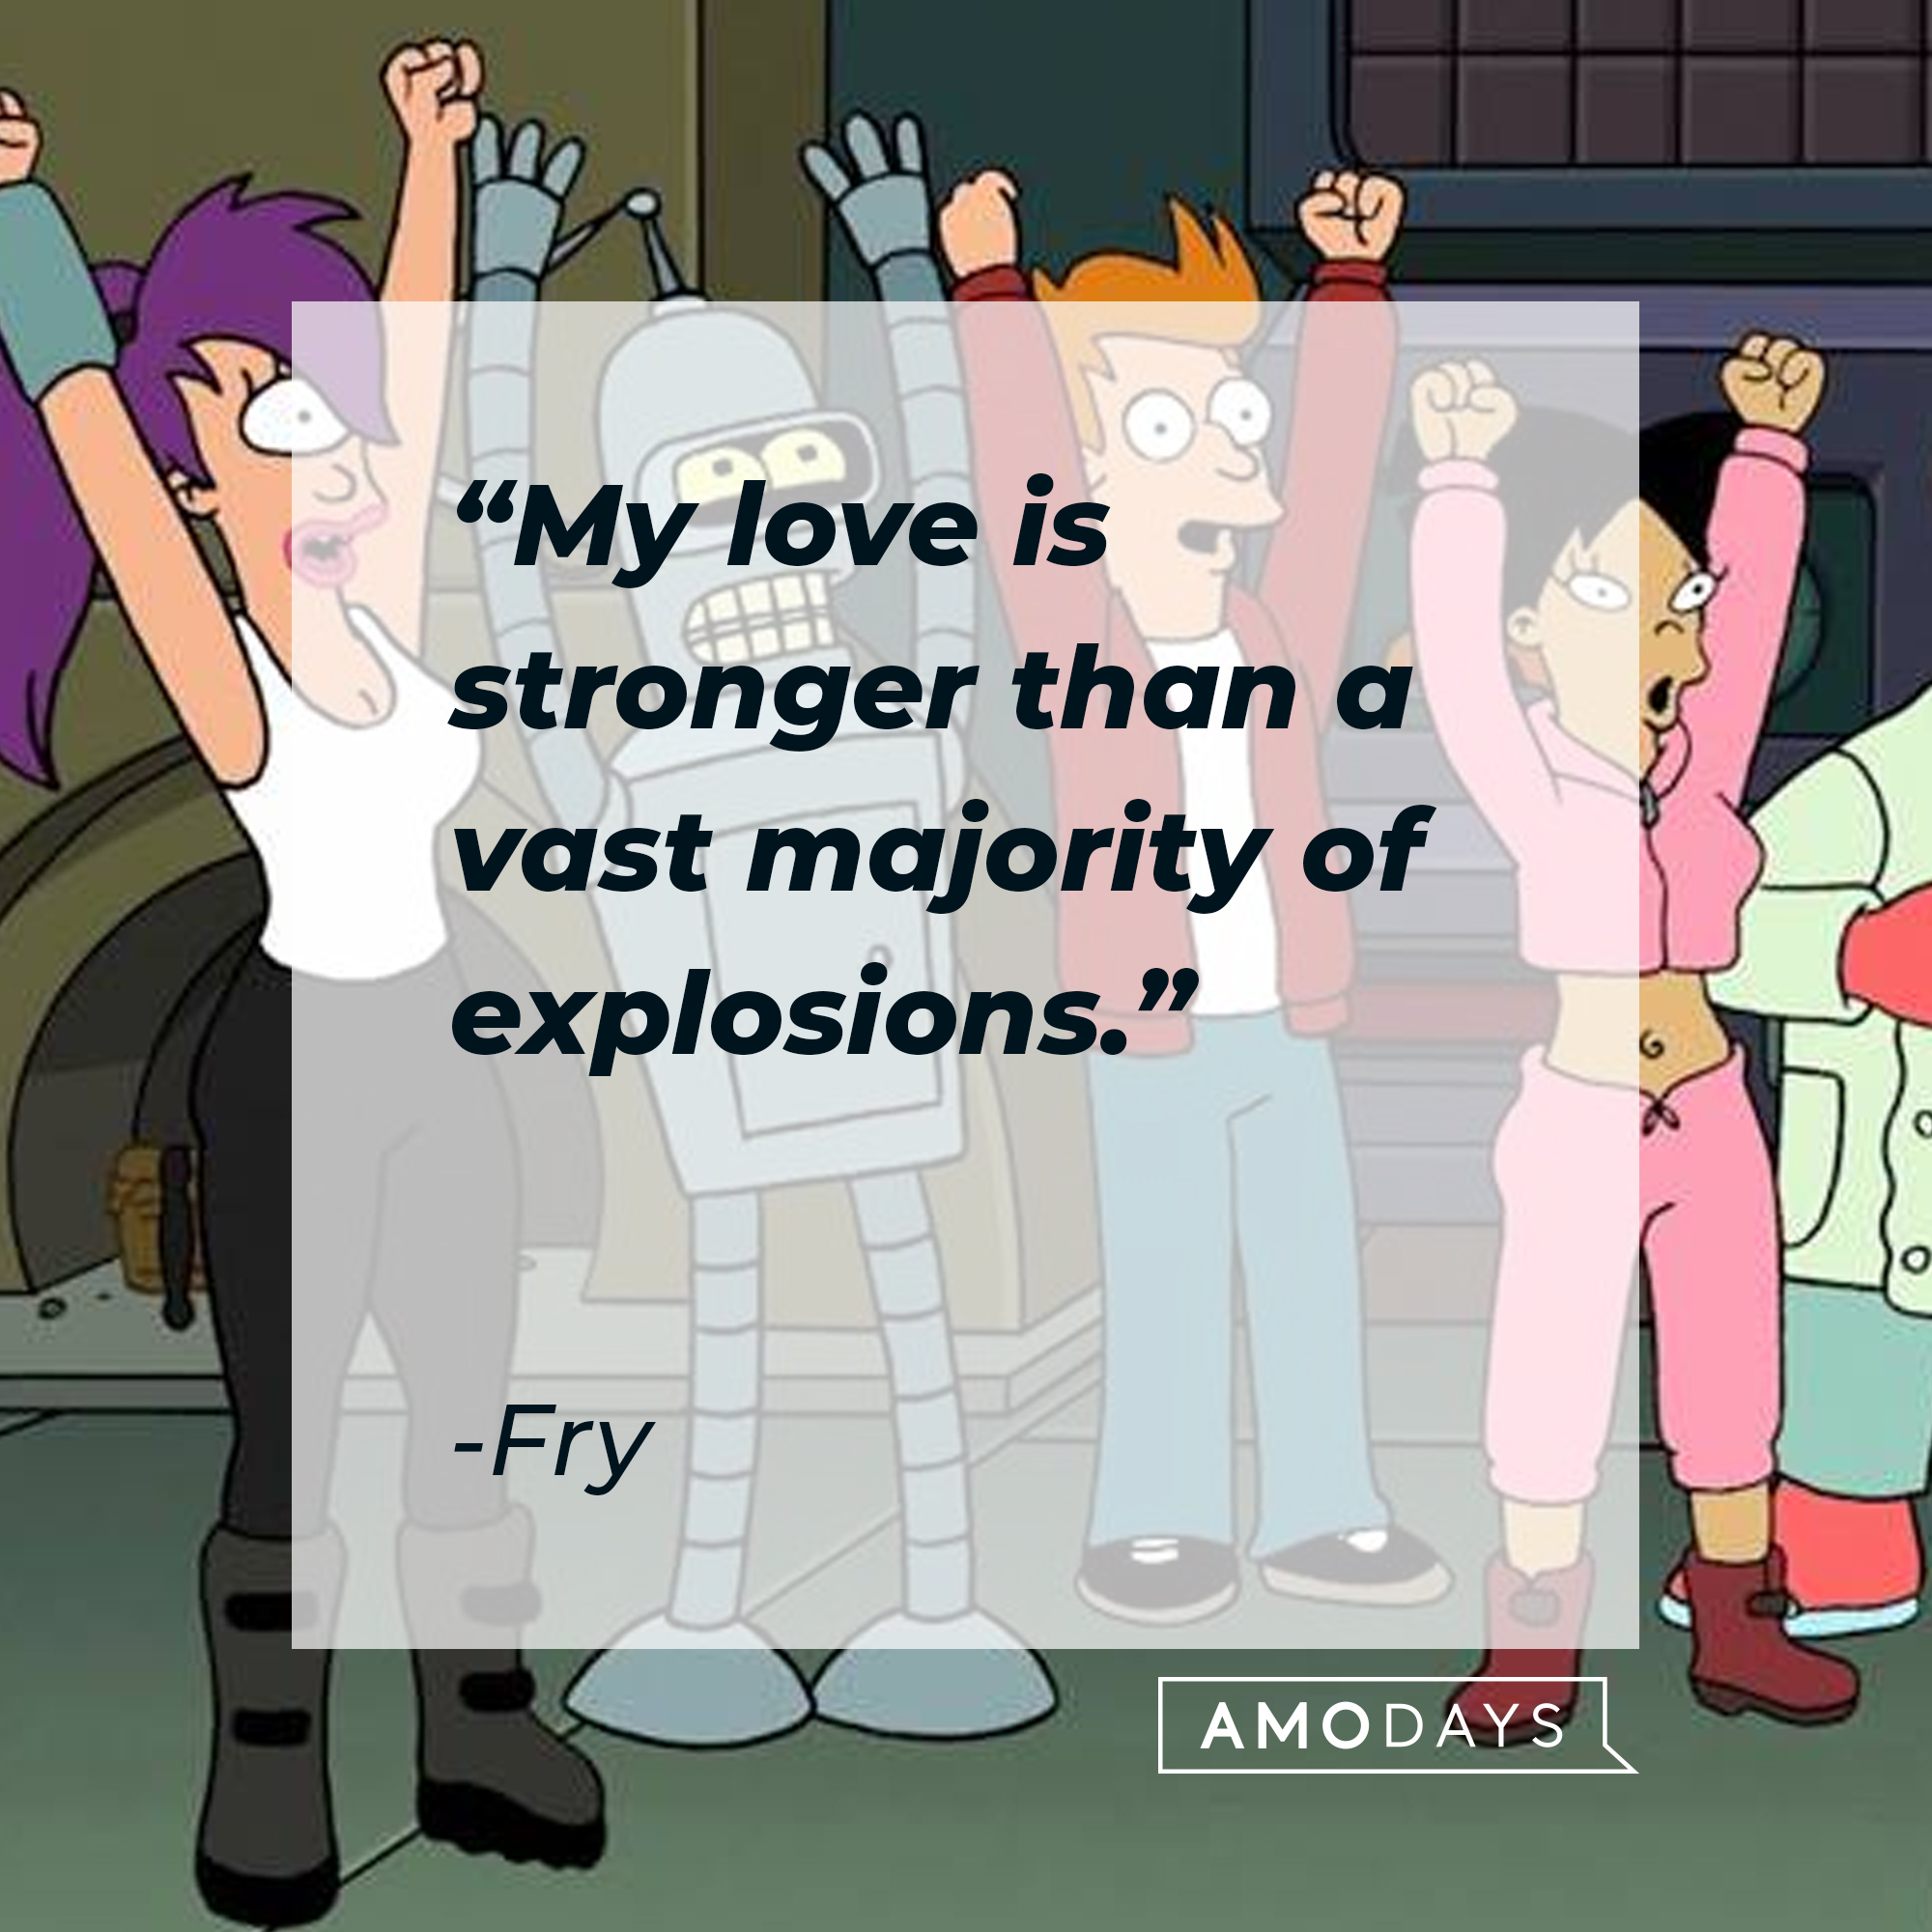 Fry Futurama's quote: "My love is stronger than a vast majority of explosions." | Source: Facebook.com/Futurama